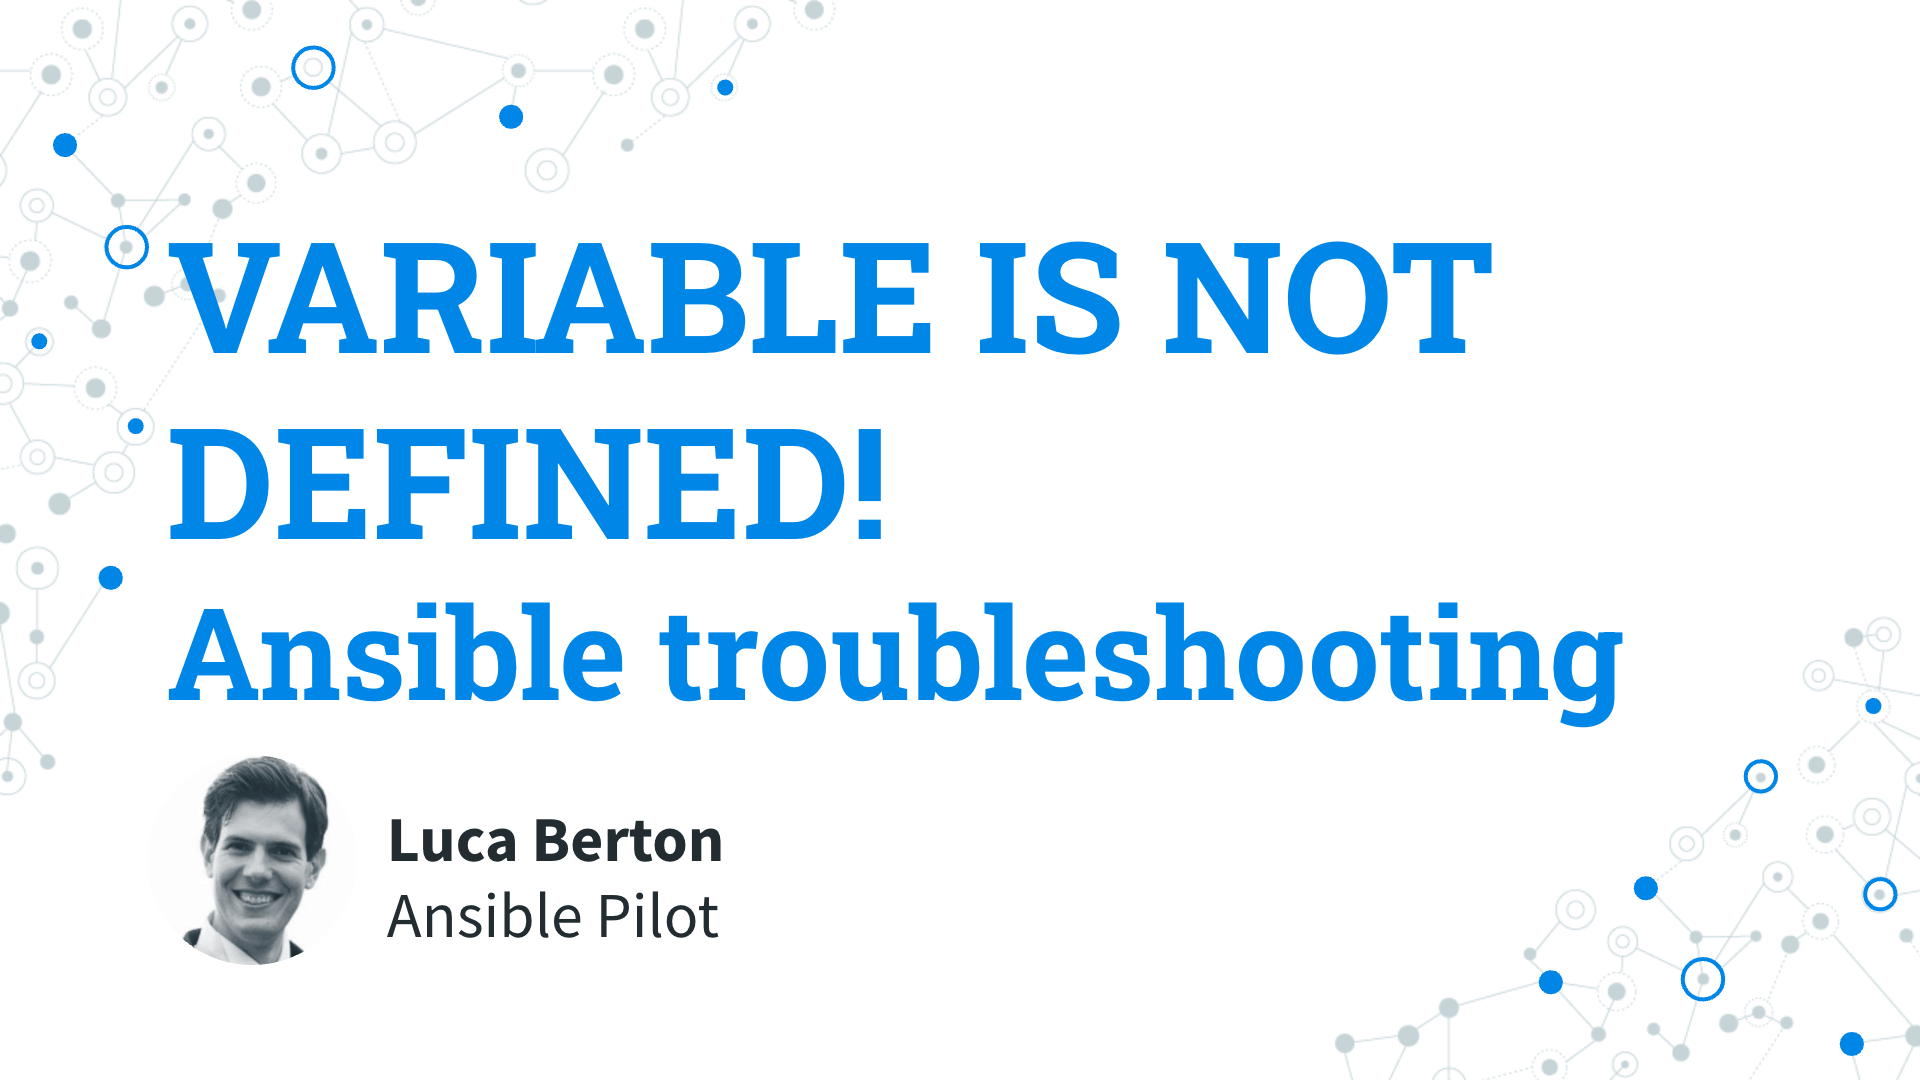 Ansible troubleshooting - VARIABLE IS NOT DEFINED! ansible_hostname